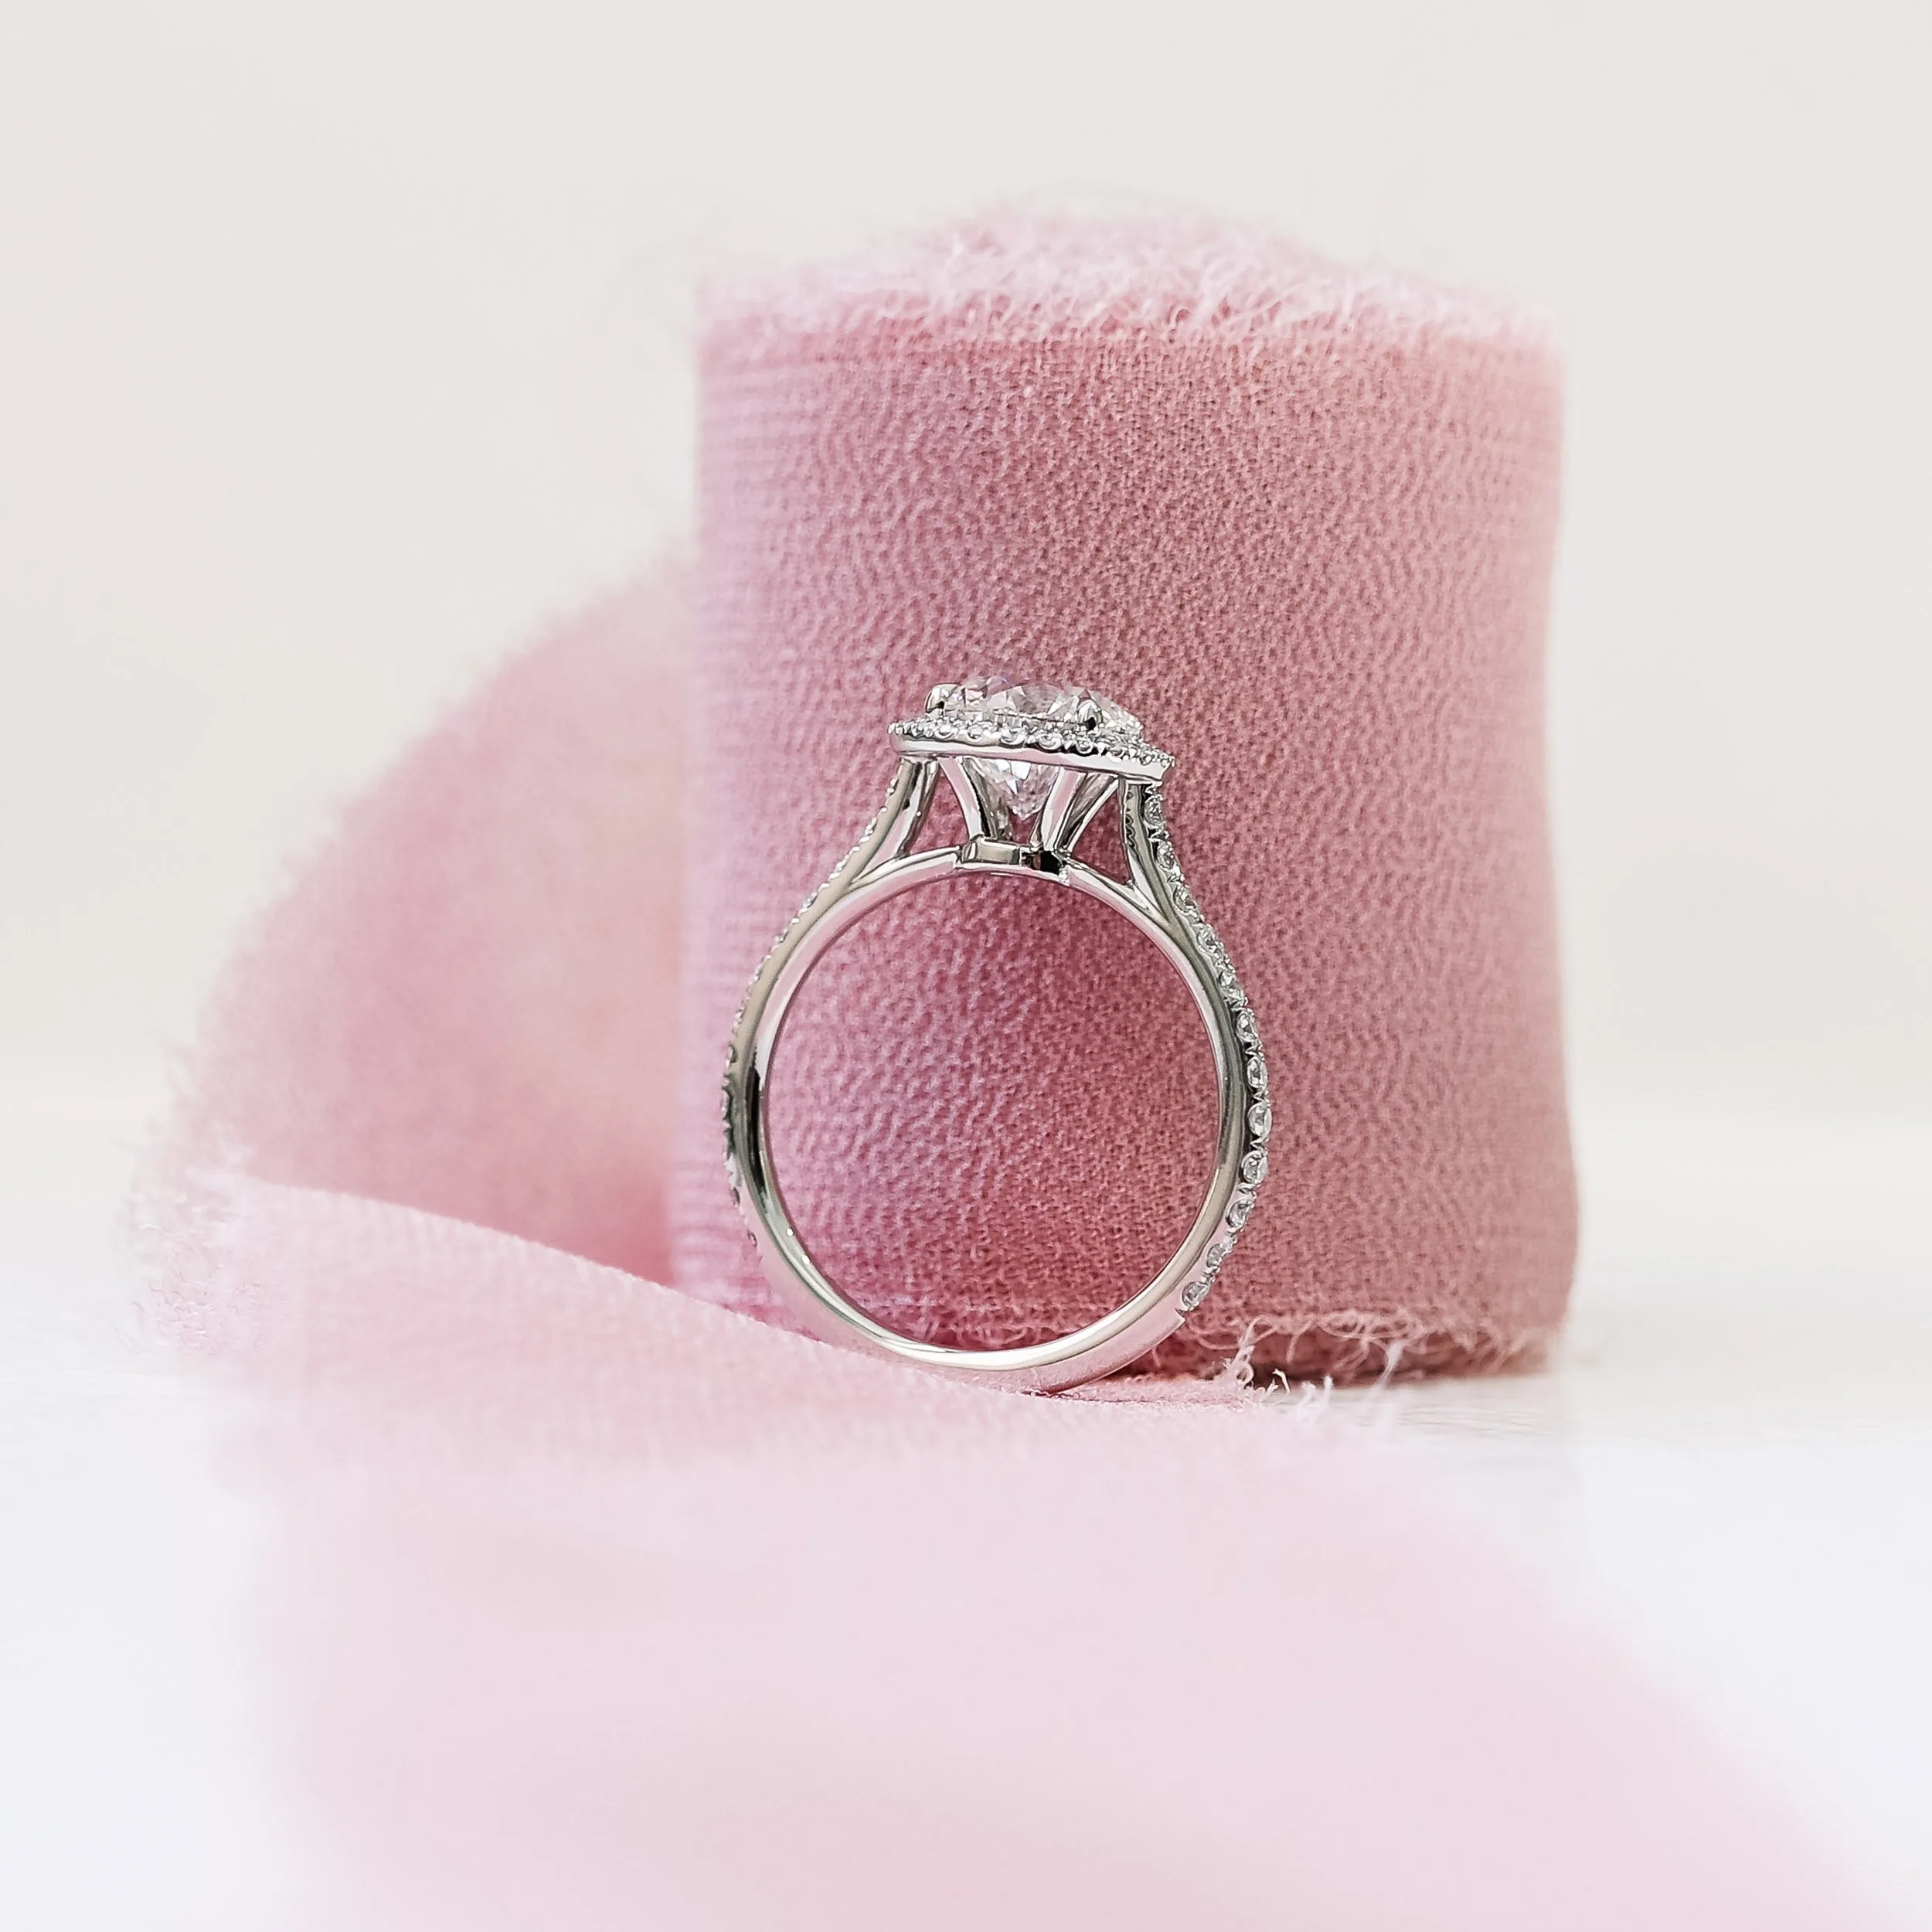 lab diamond engagement ring with halo in white gold